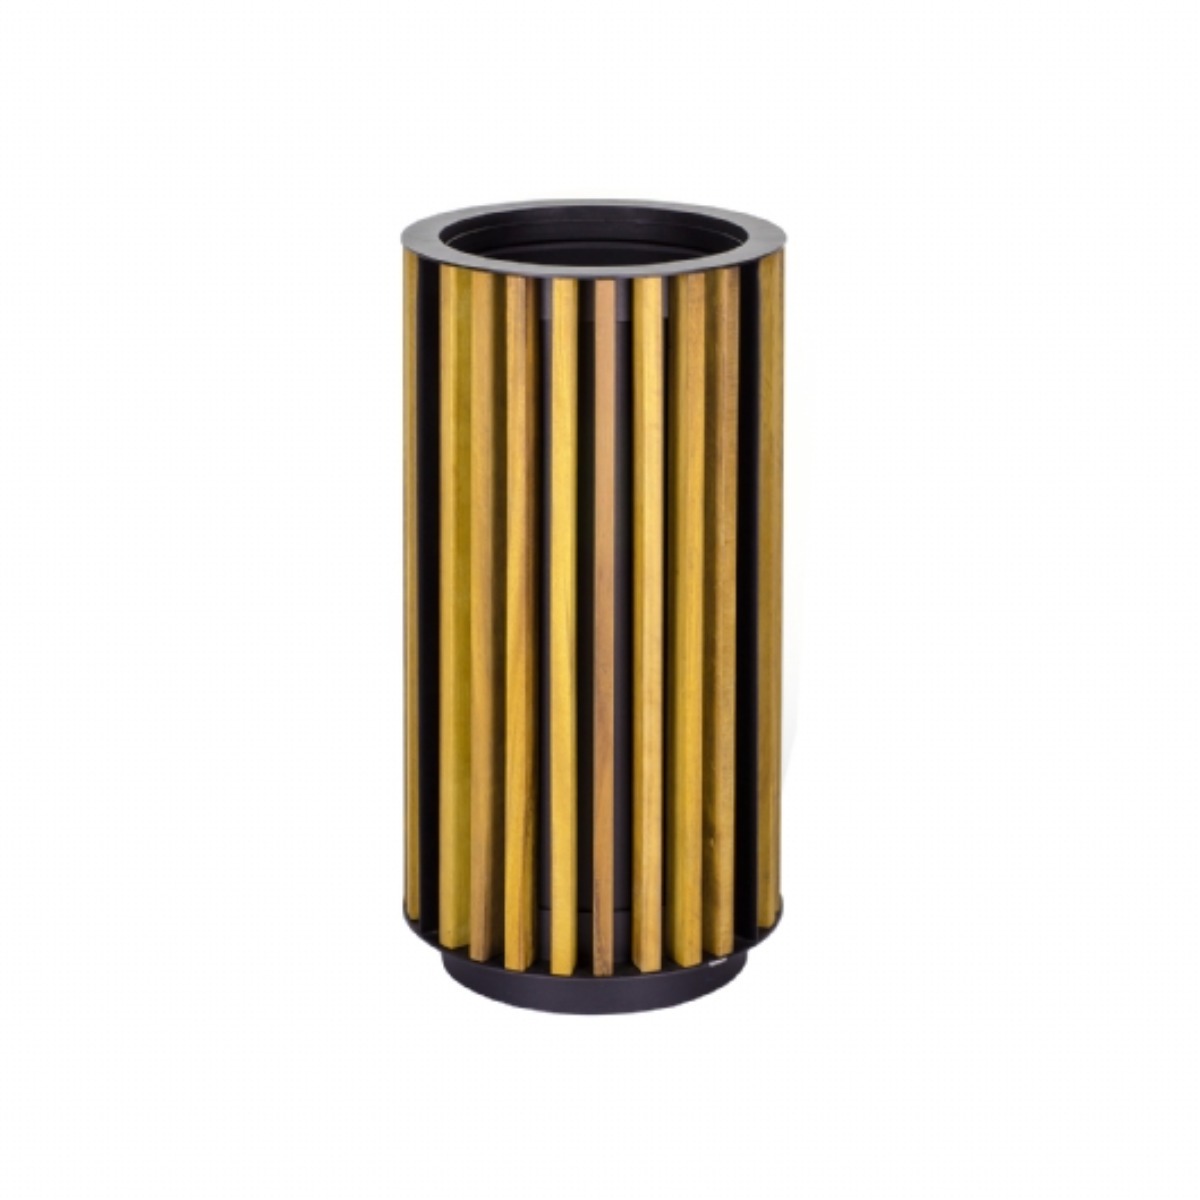 AB-512 Wood Open Space Trash Can product logo